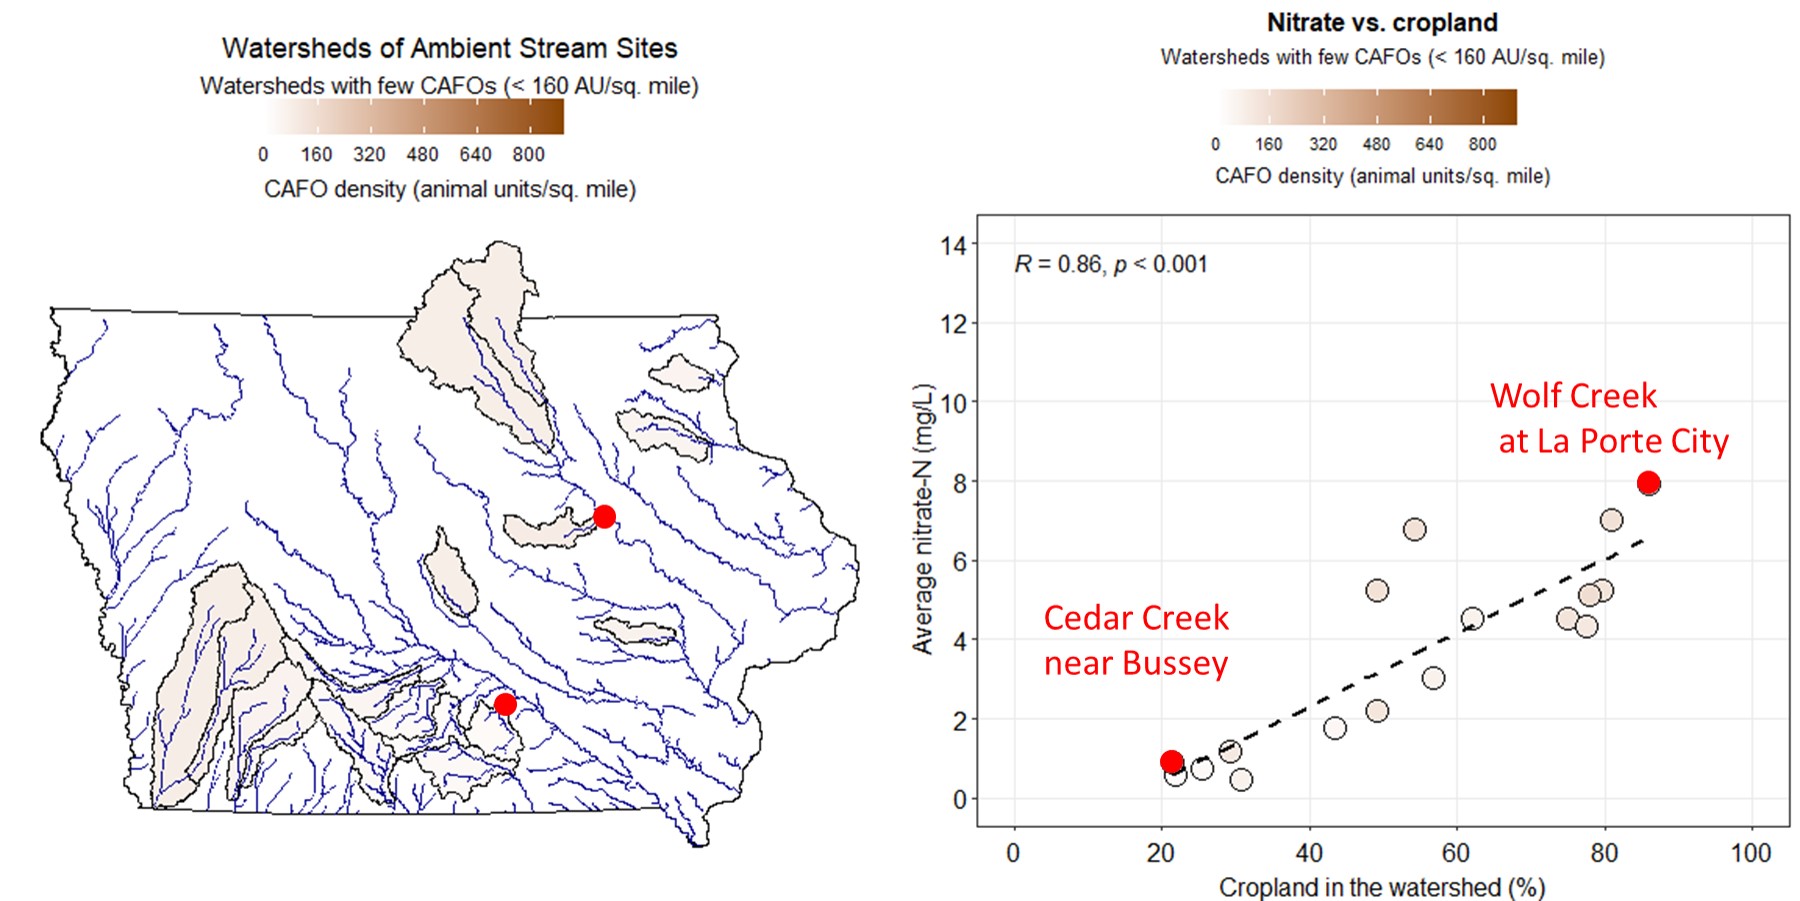 Nitrate vs cropland in watershed, for watersheds with few CAFOs